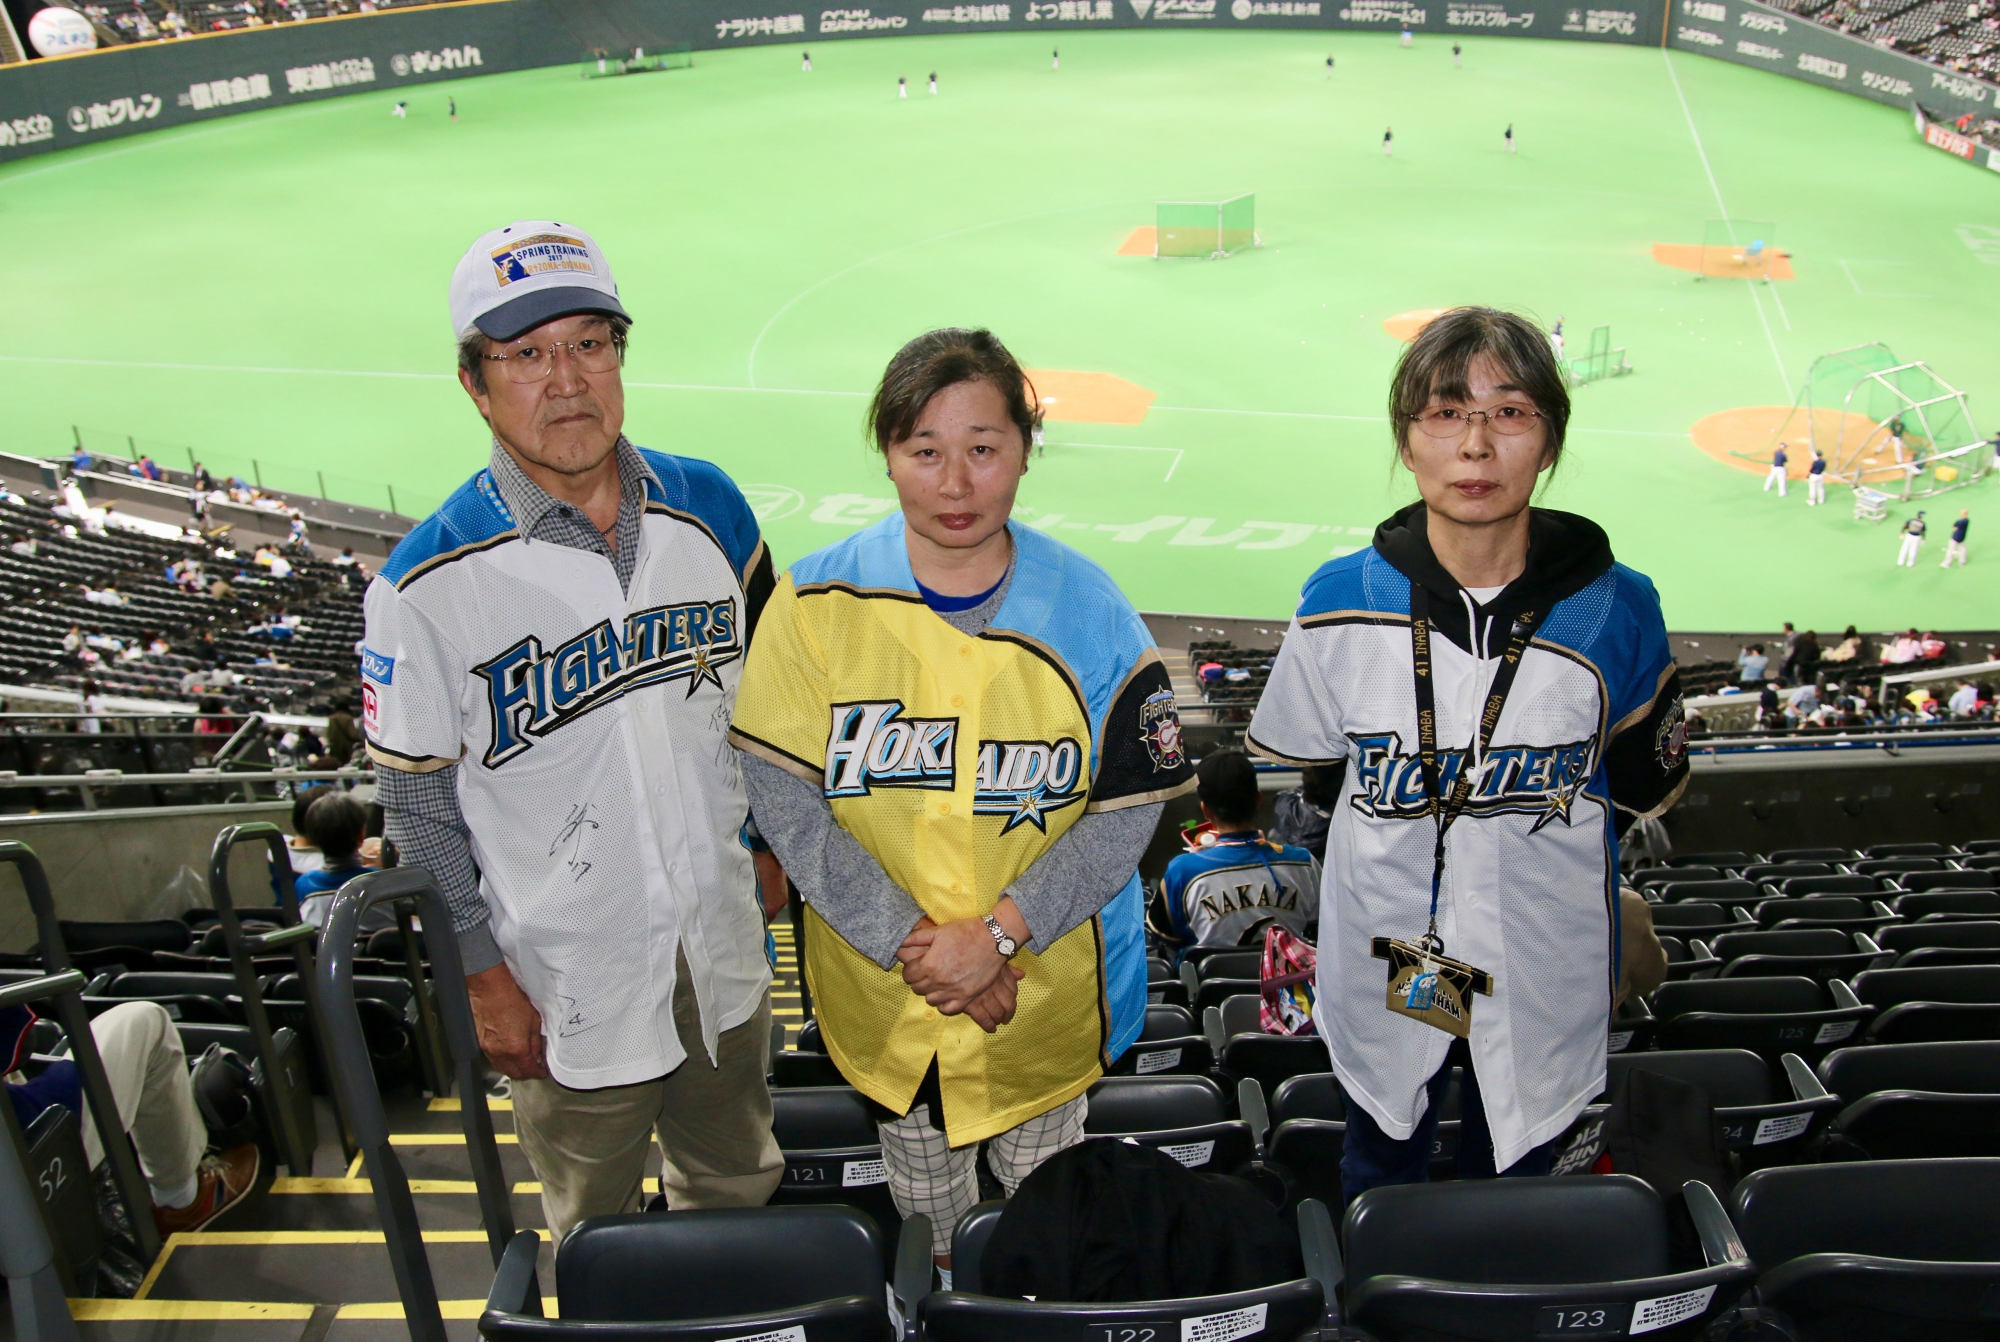 MLB Field of Dream Game: Fans have mixed feelings over jerseys